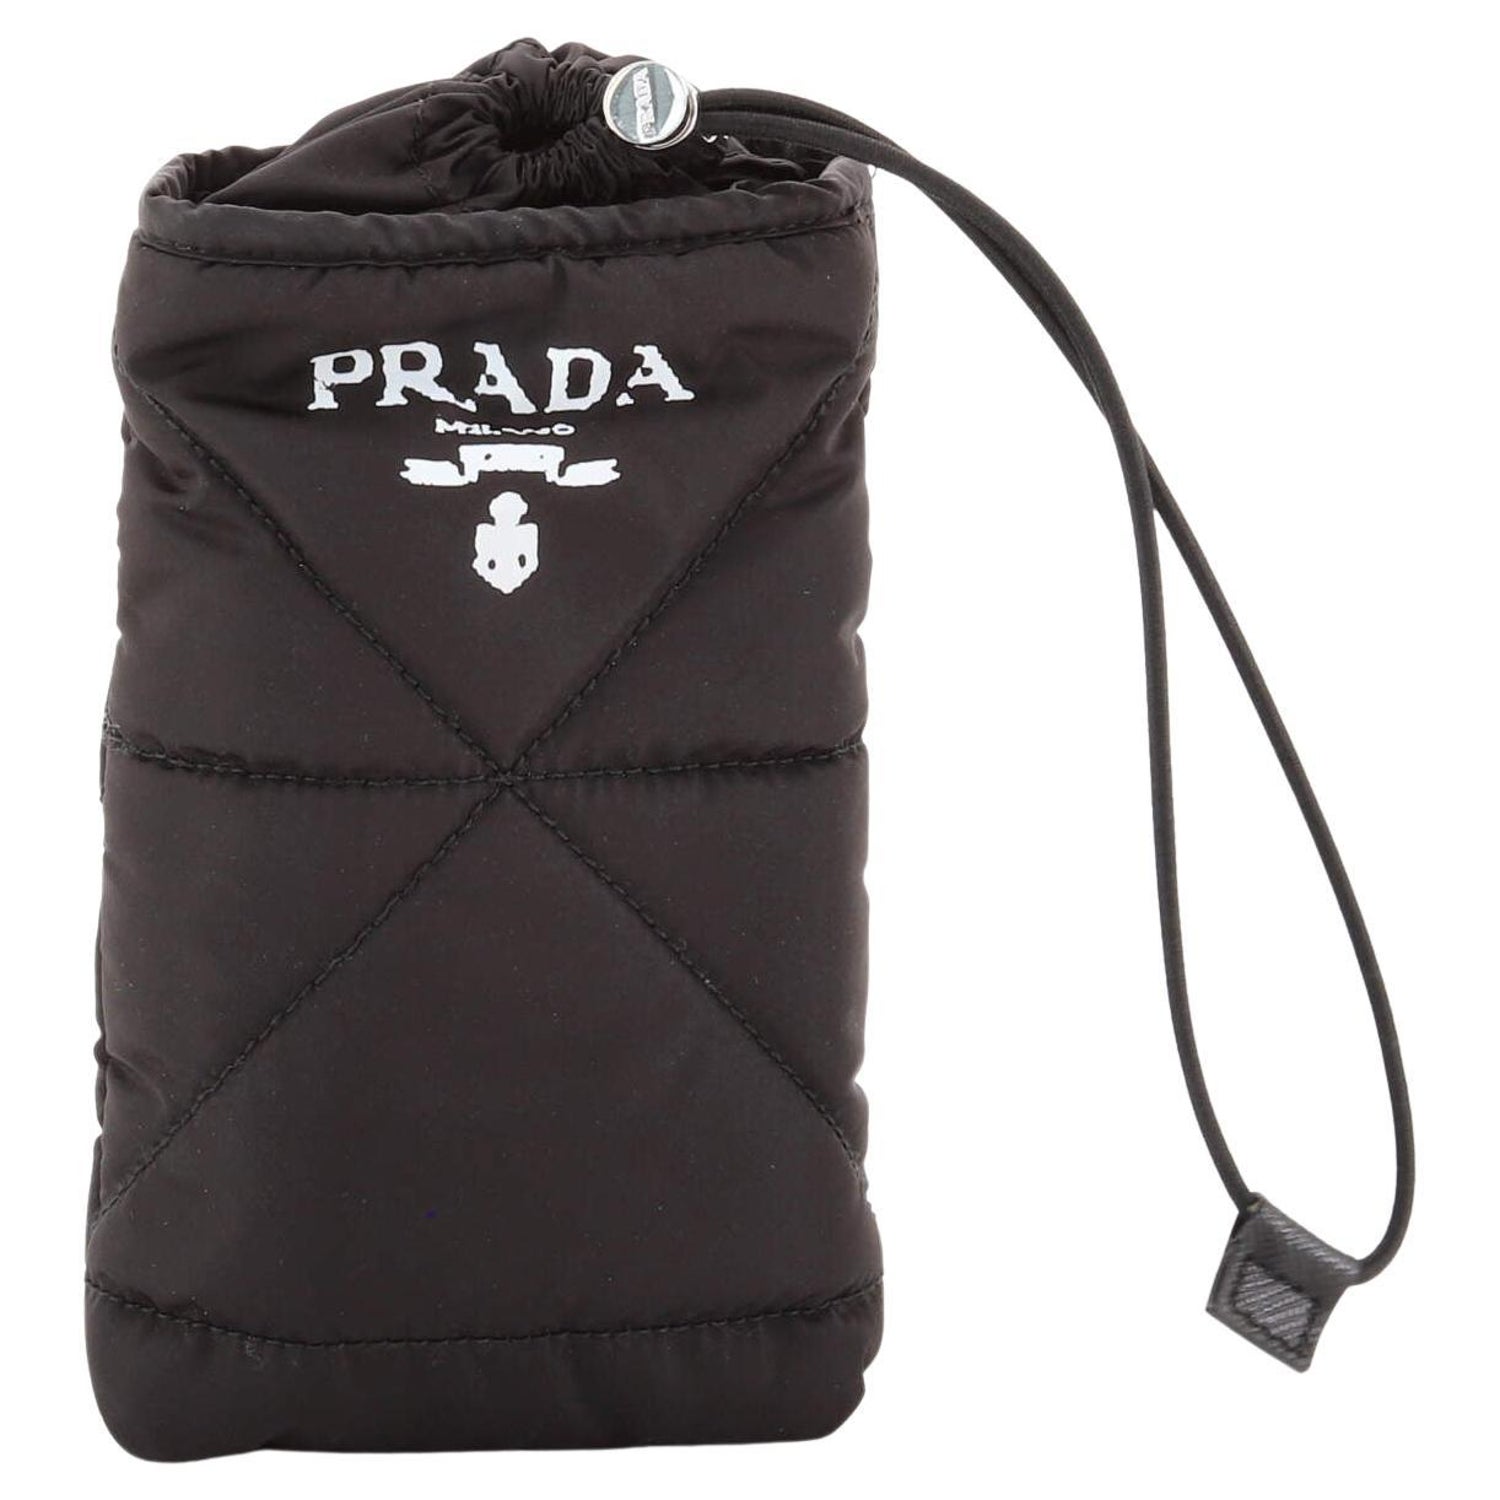 Prada Phone Pouch - 4 For Sale on 1stDibs